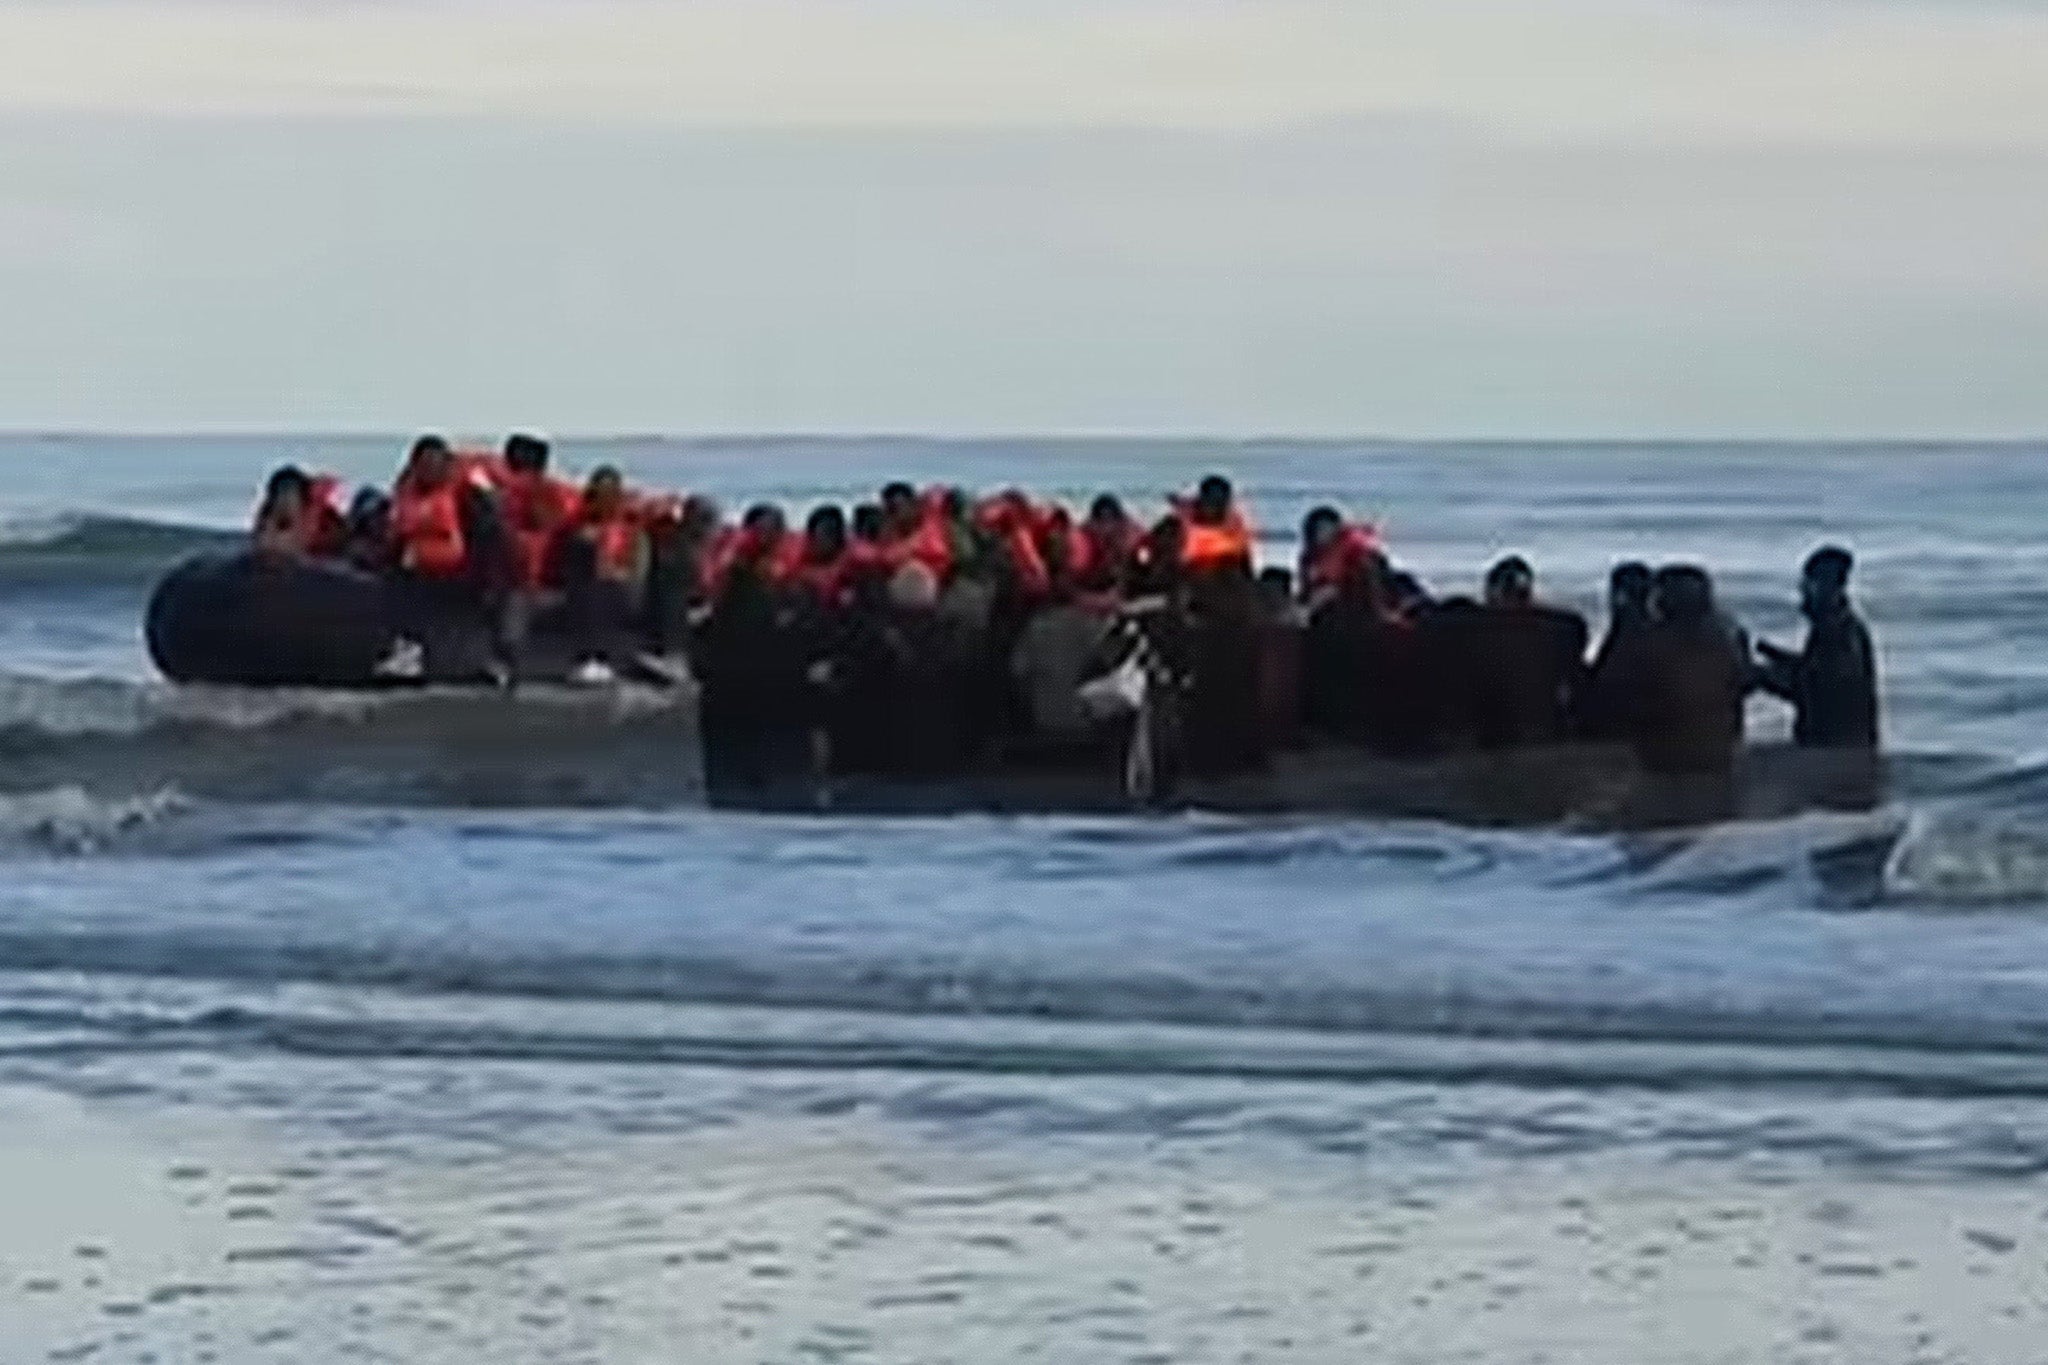 File photo: Footage from BBC News shows migrants in small boat at Dunkirk on Tuesday morning